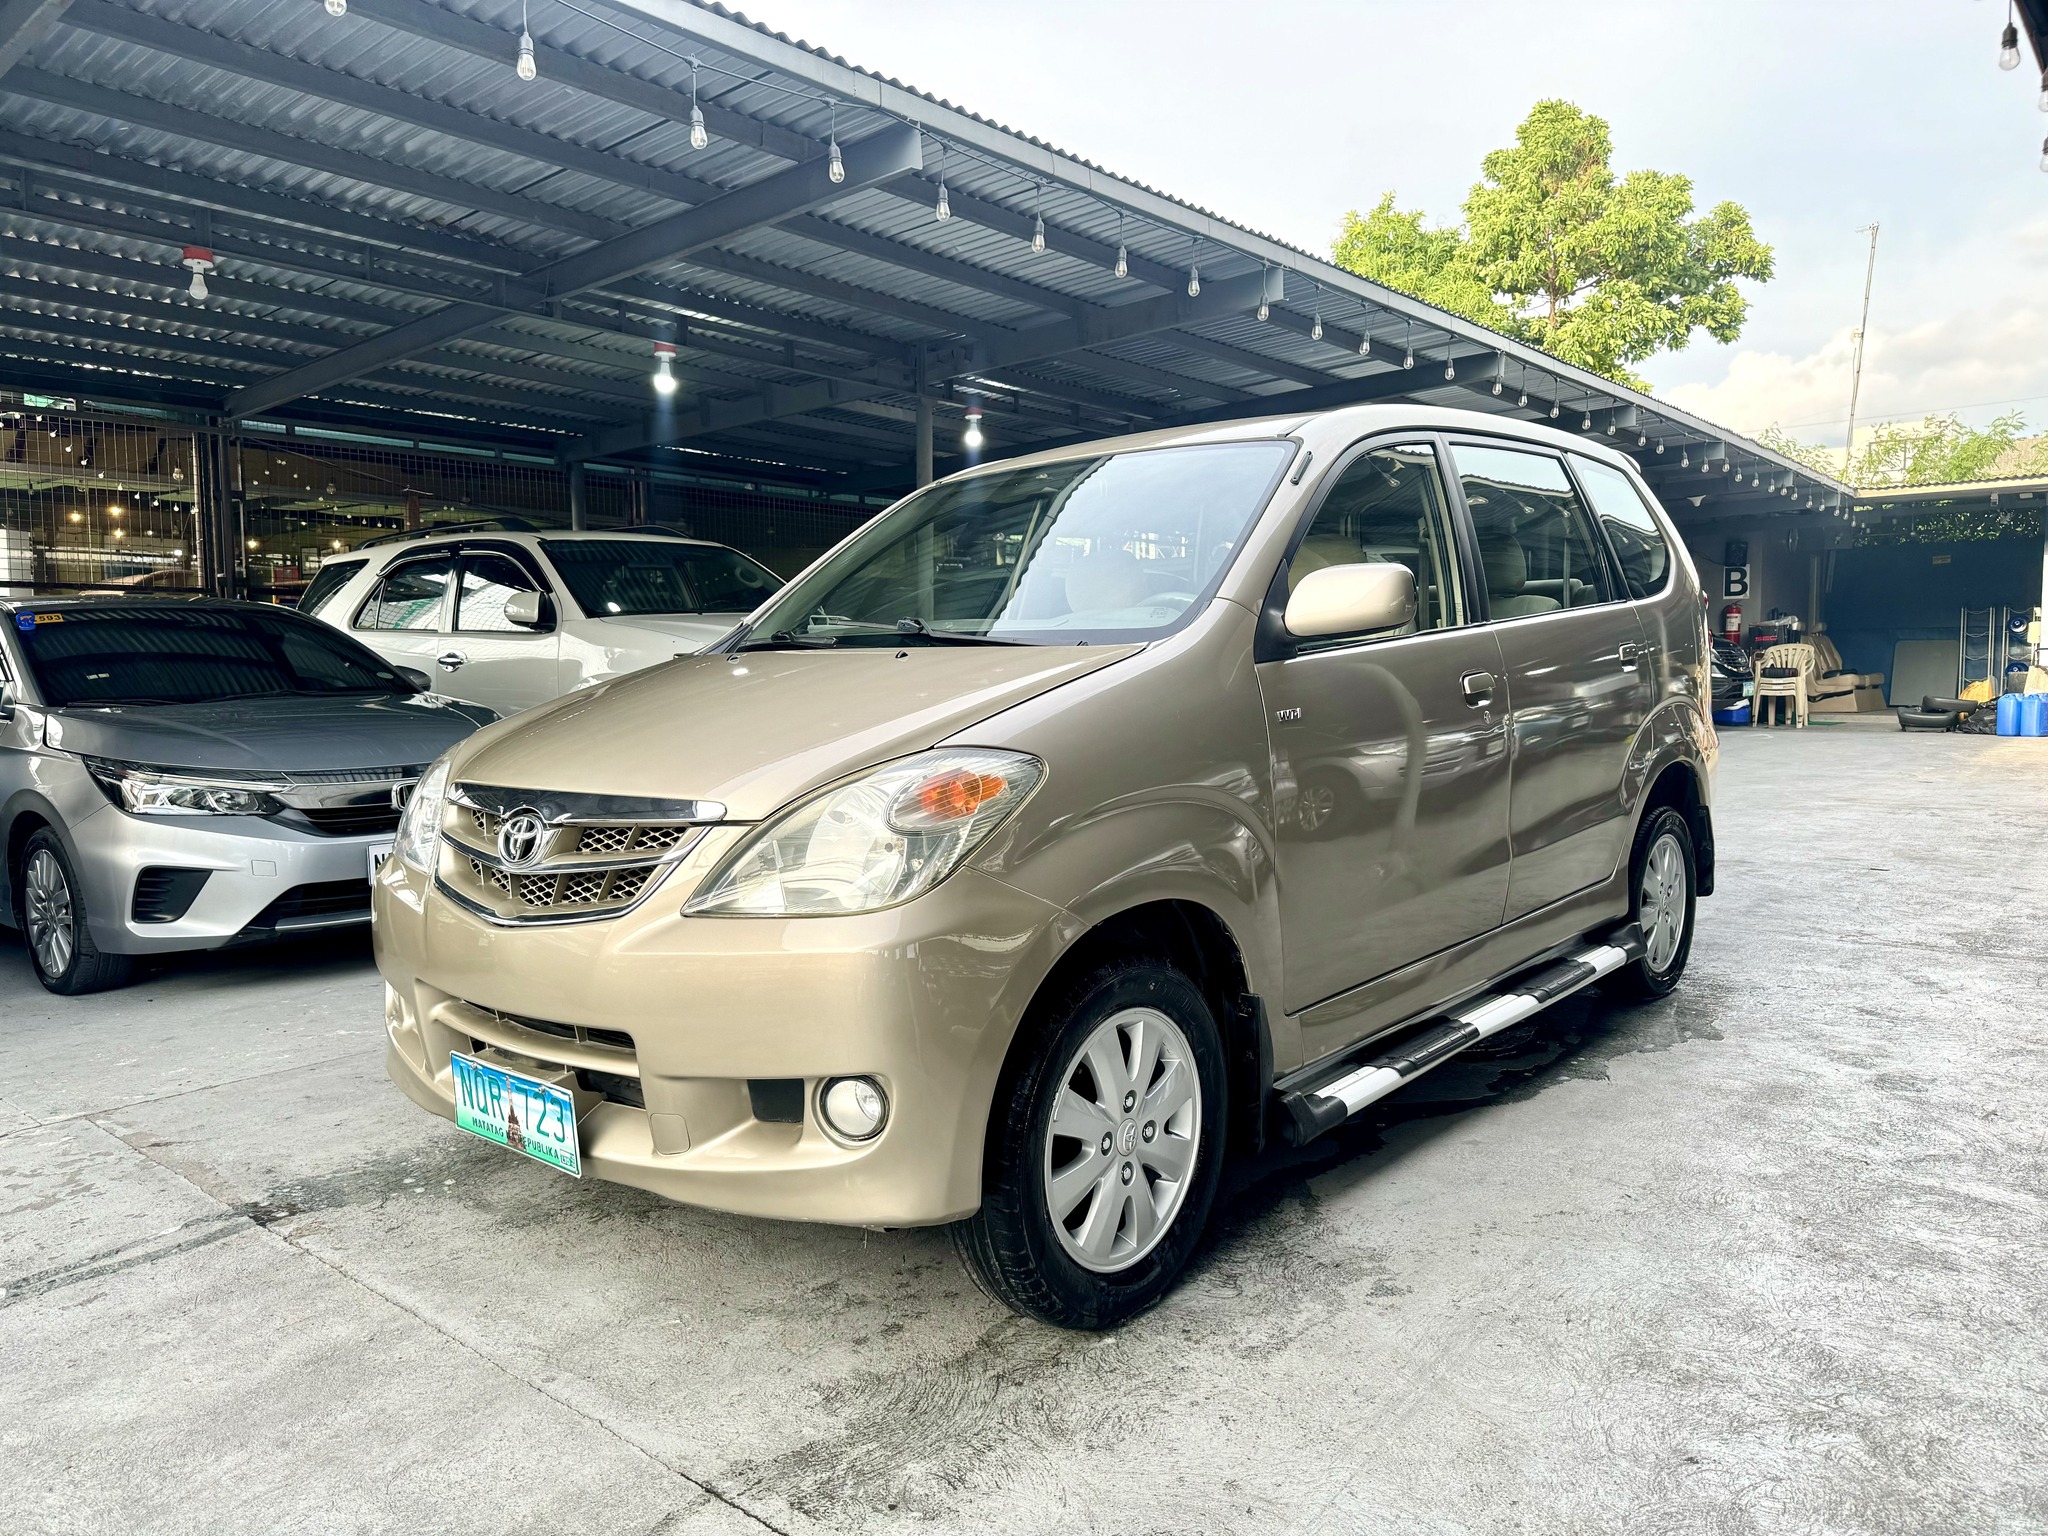 2010 Toyota Avanza 1.5 G Automatic Gas 7 Seater